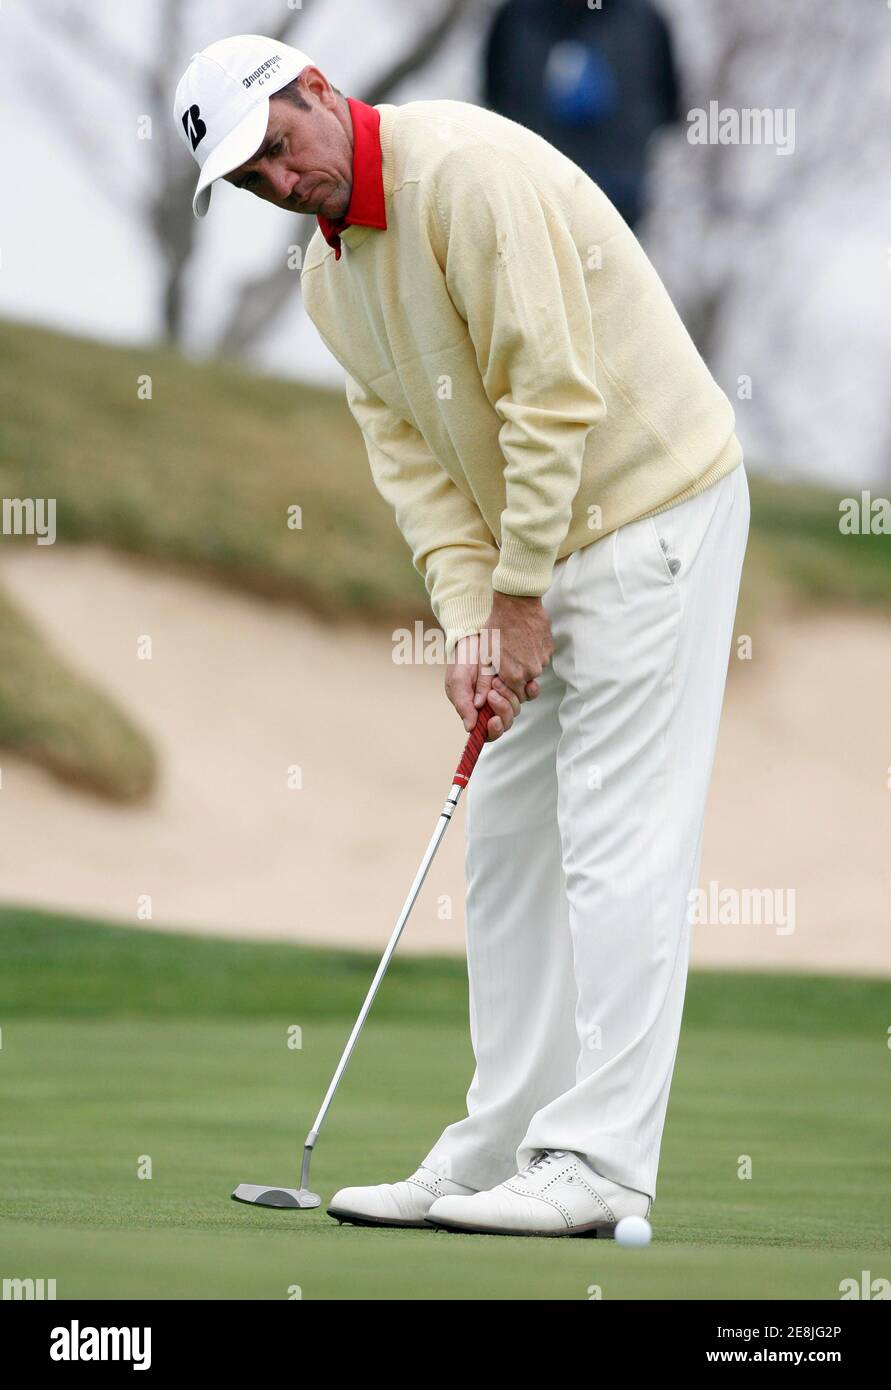 Scott Hend of Australia putts for a par on the 16th hole during the first round of the Ballantine's Championship golf tournament at the Pinx Golf Club in Seogwipo, on Jeju Island, March 13, 2008.  REUTERS/Jo Yong-Hak (SOUTH KOREA) Stock Photo